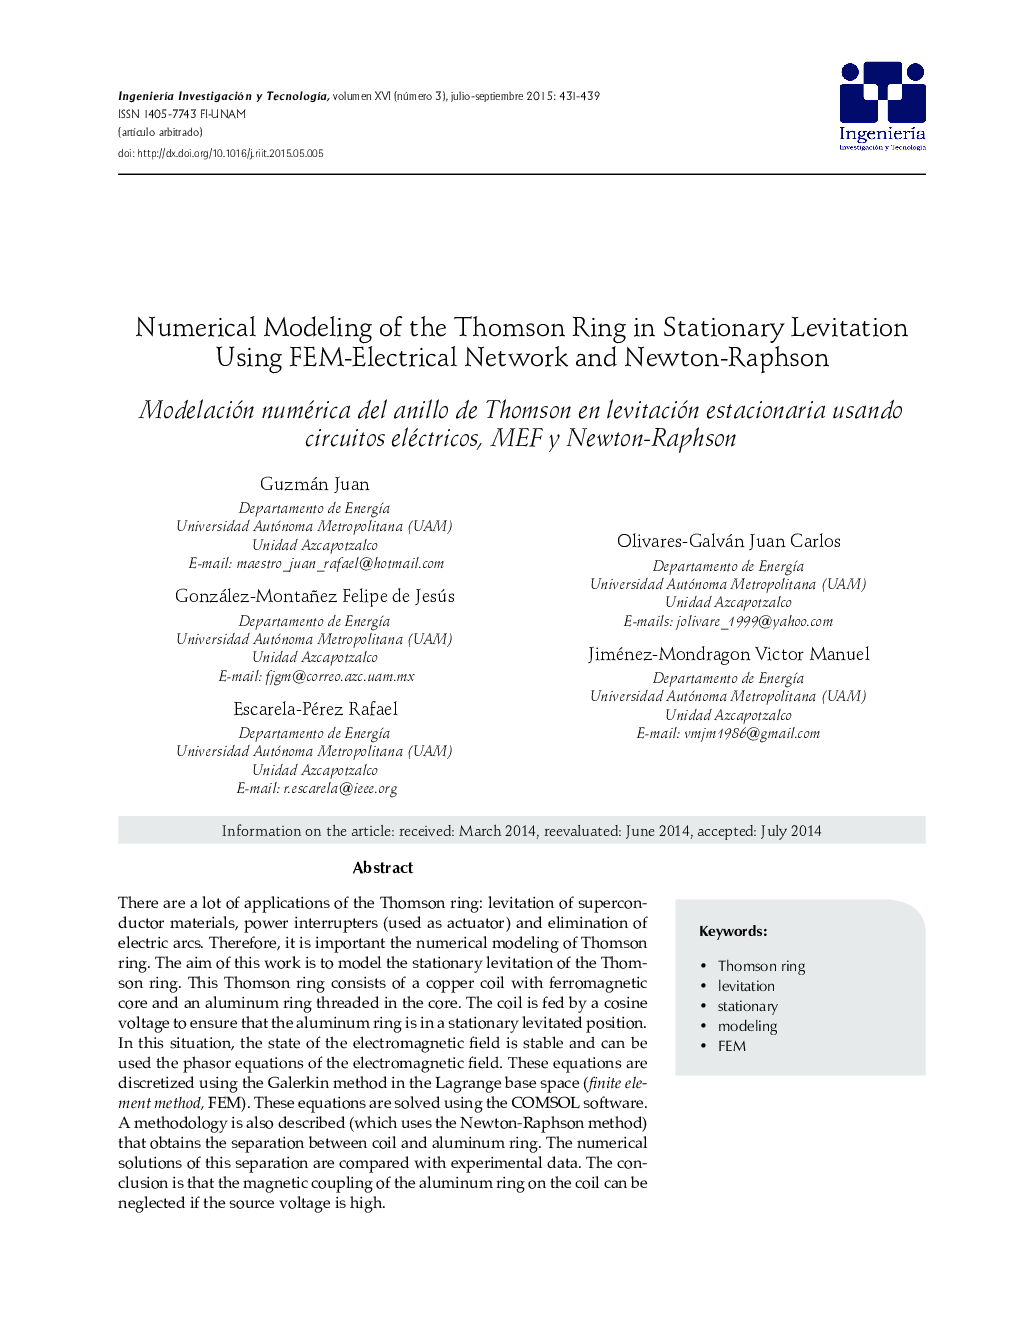 Numerical Modeling of the Thomson Ring in Stationary Levitation Using FEM-Electrical Network and Newton-Raphson